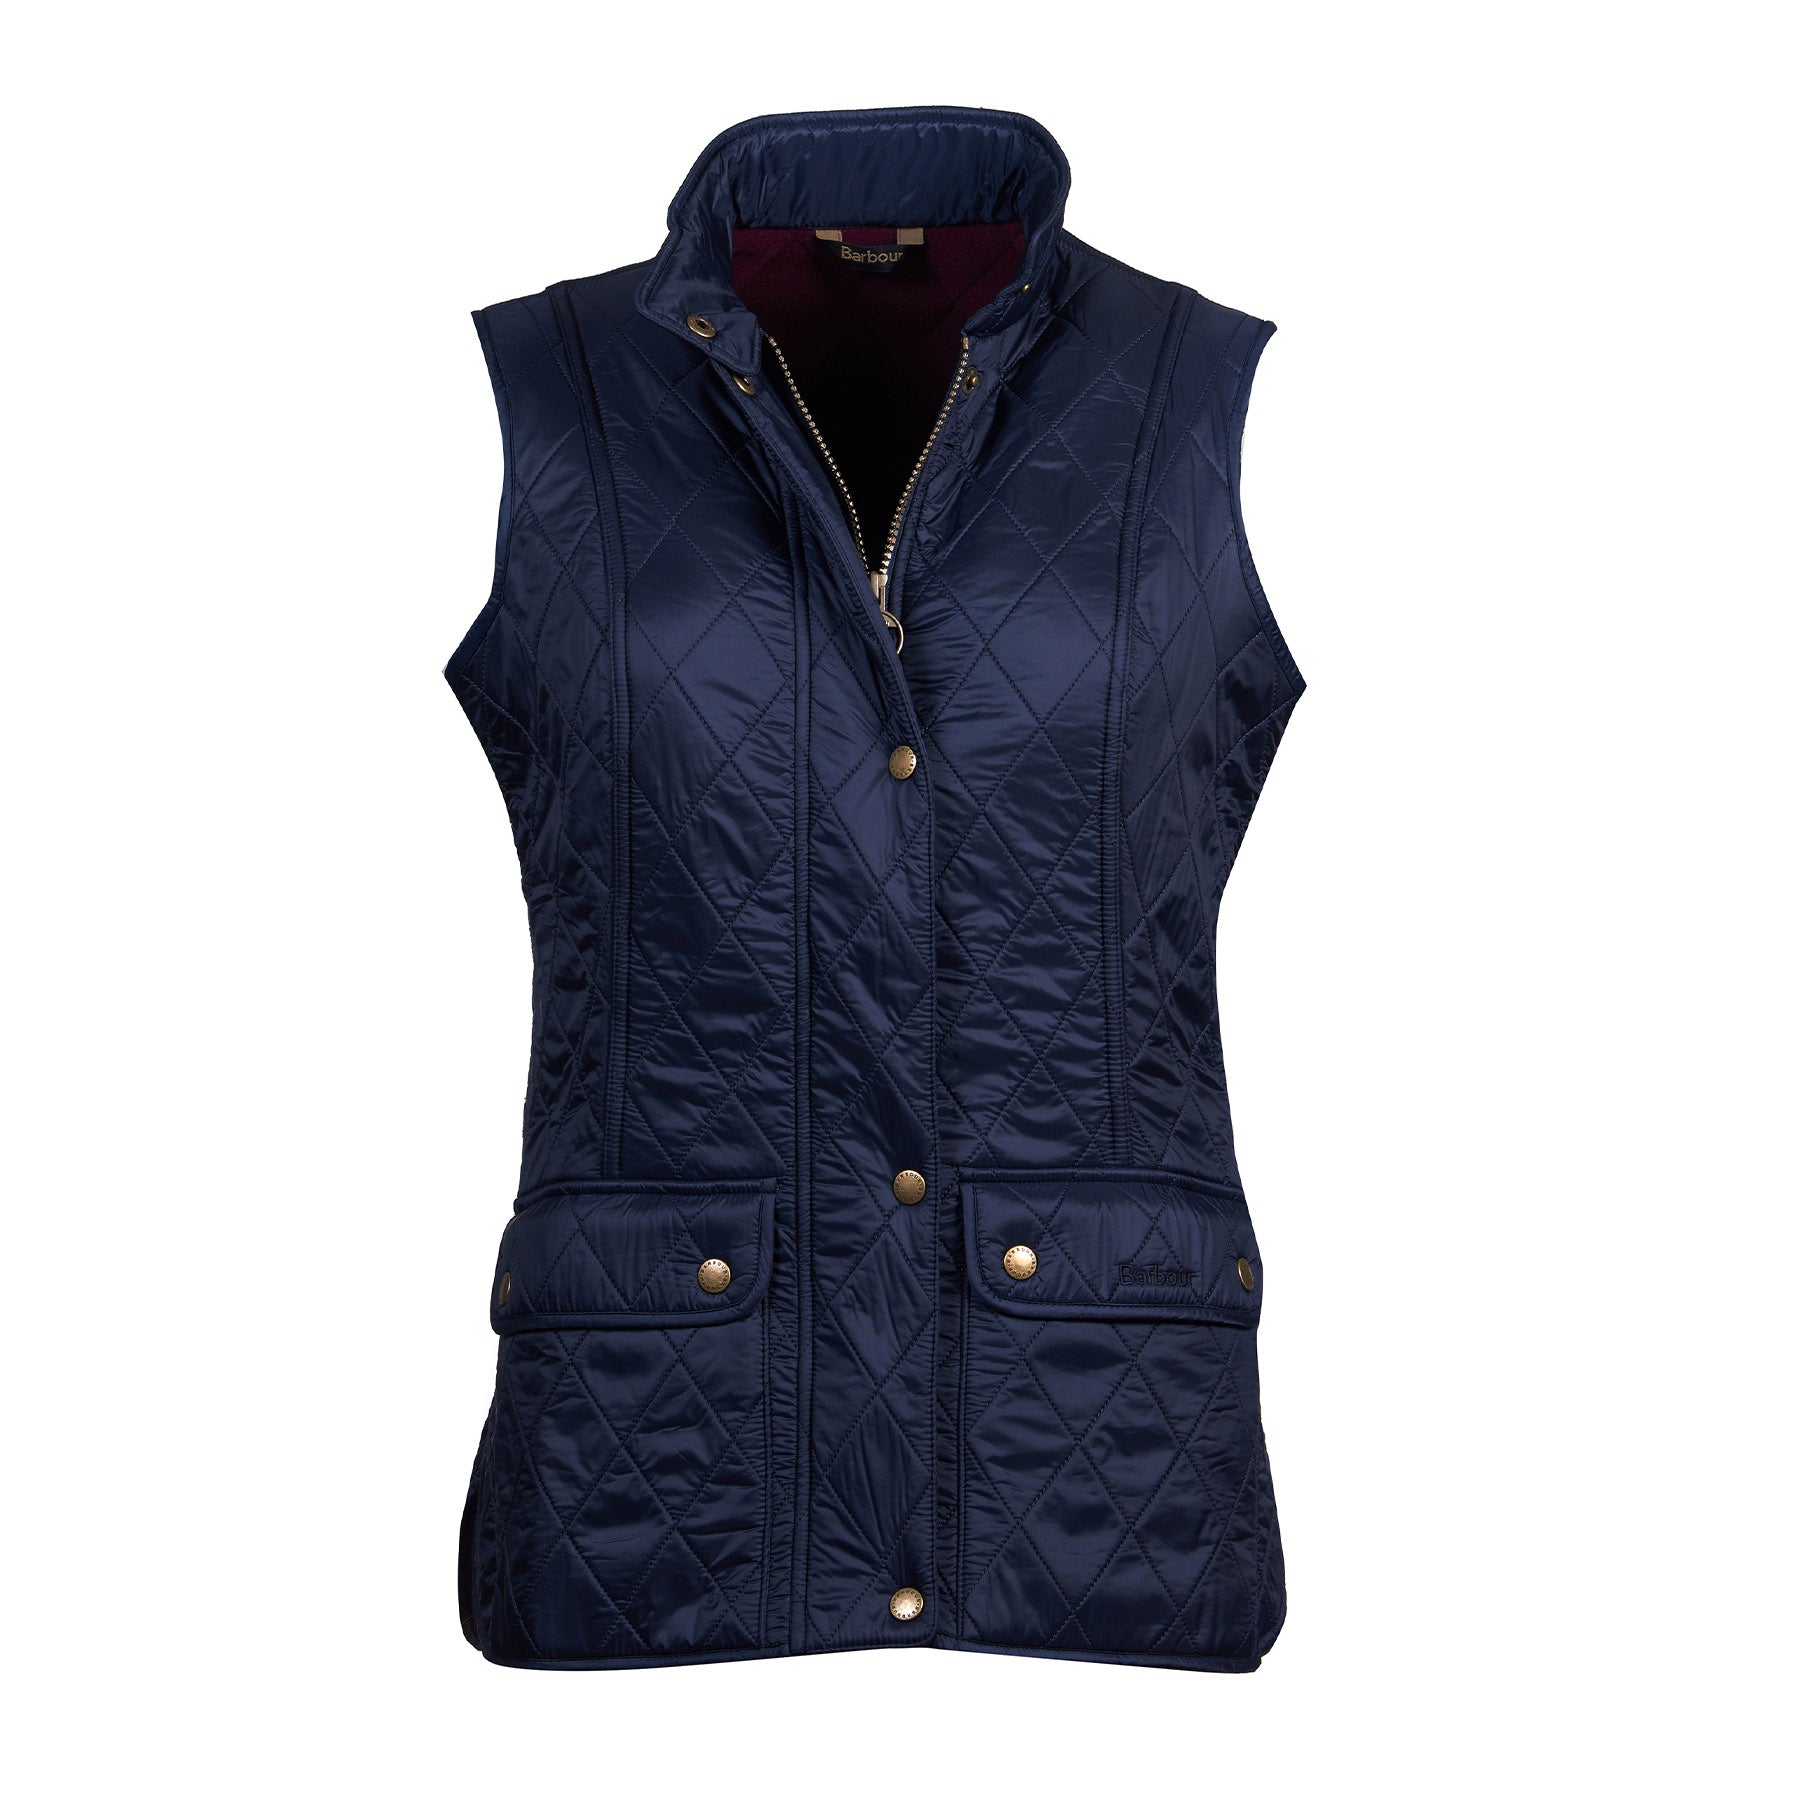 Hero image featuring the Barbour Wray Gilet in navy with brass buttons and a brass zipper.